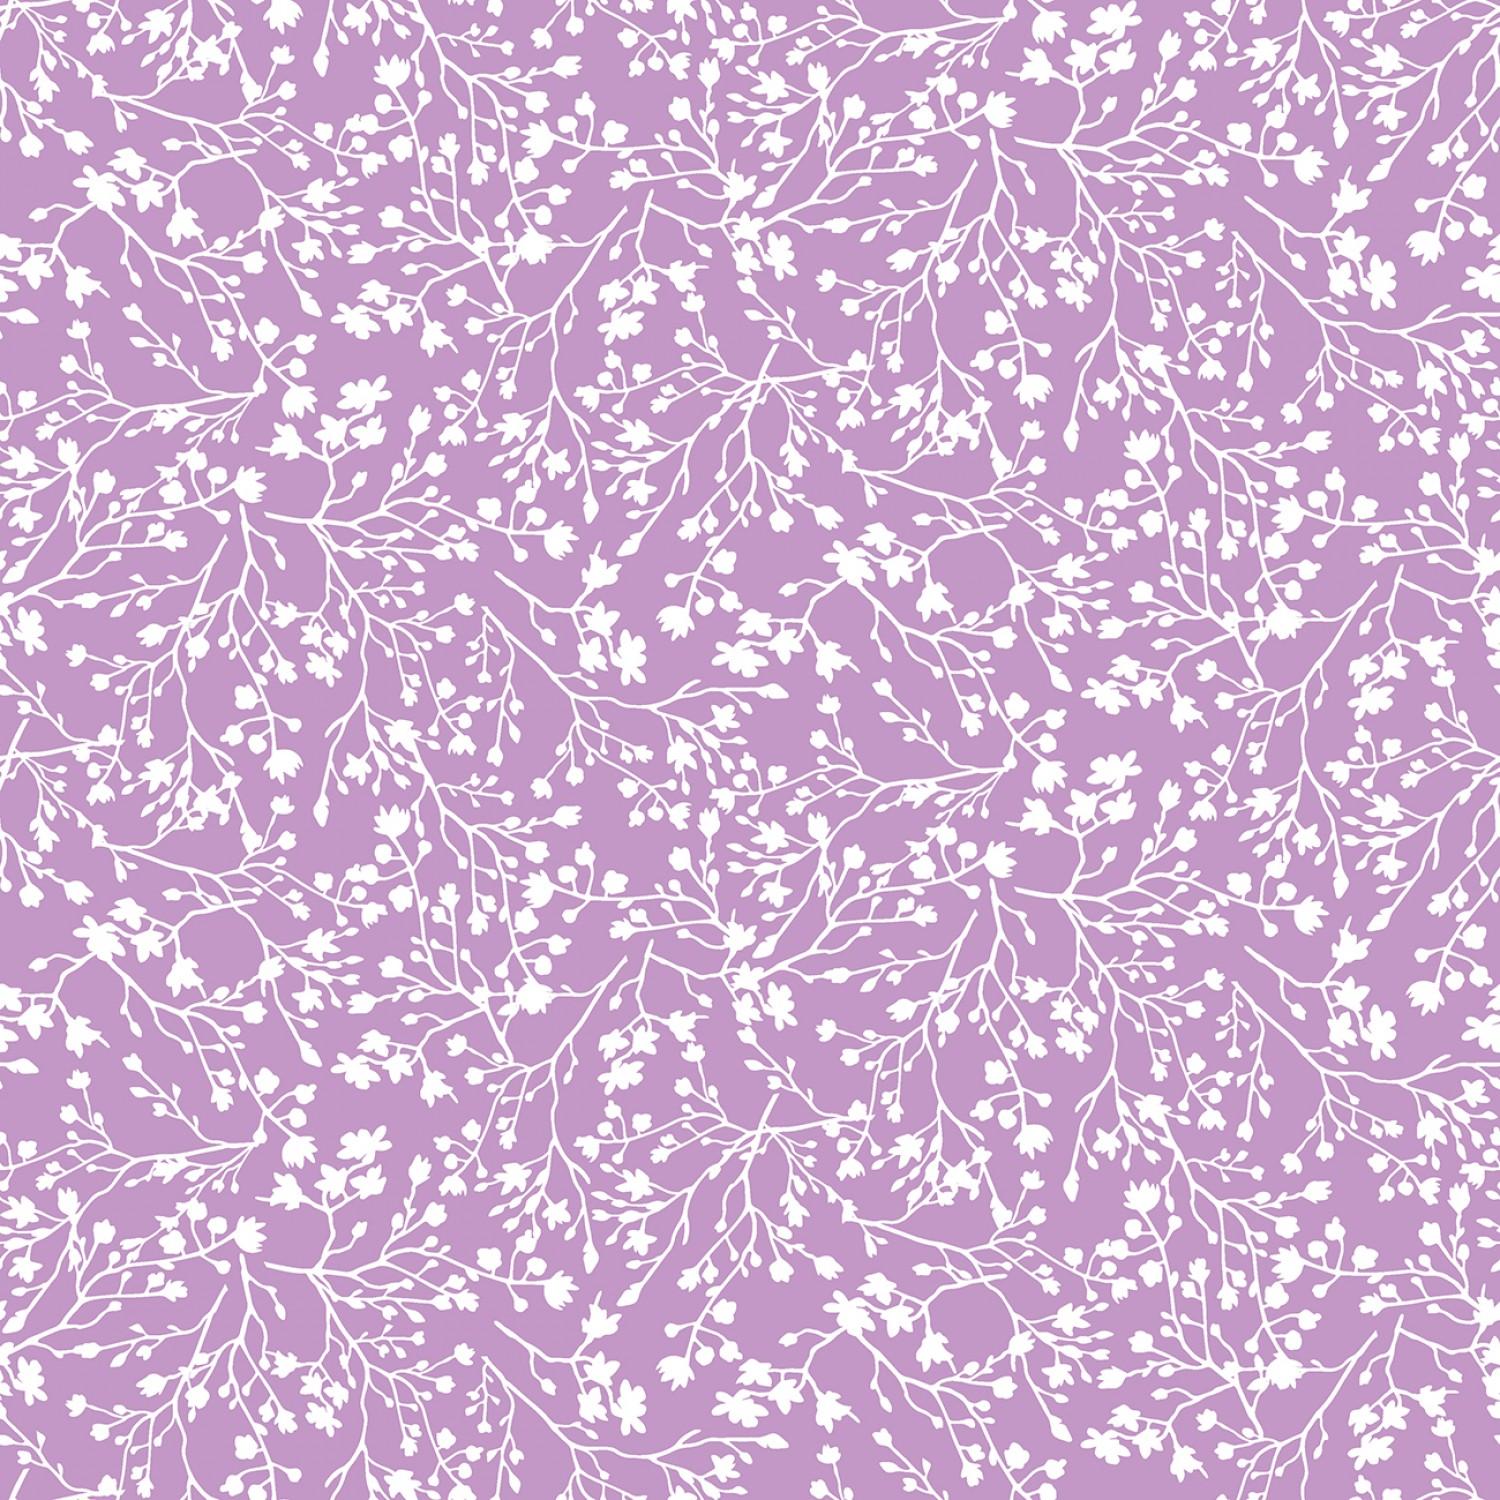 Little Bit Of Magic - Unicorn Forest Branches - CD8871-Lilac